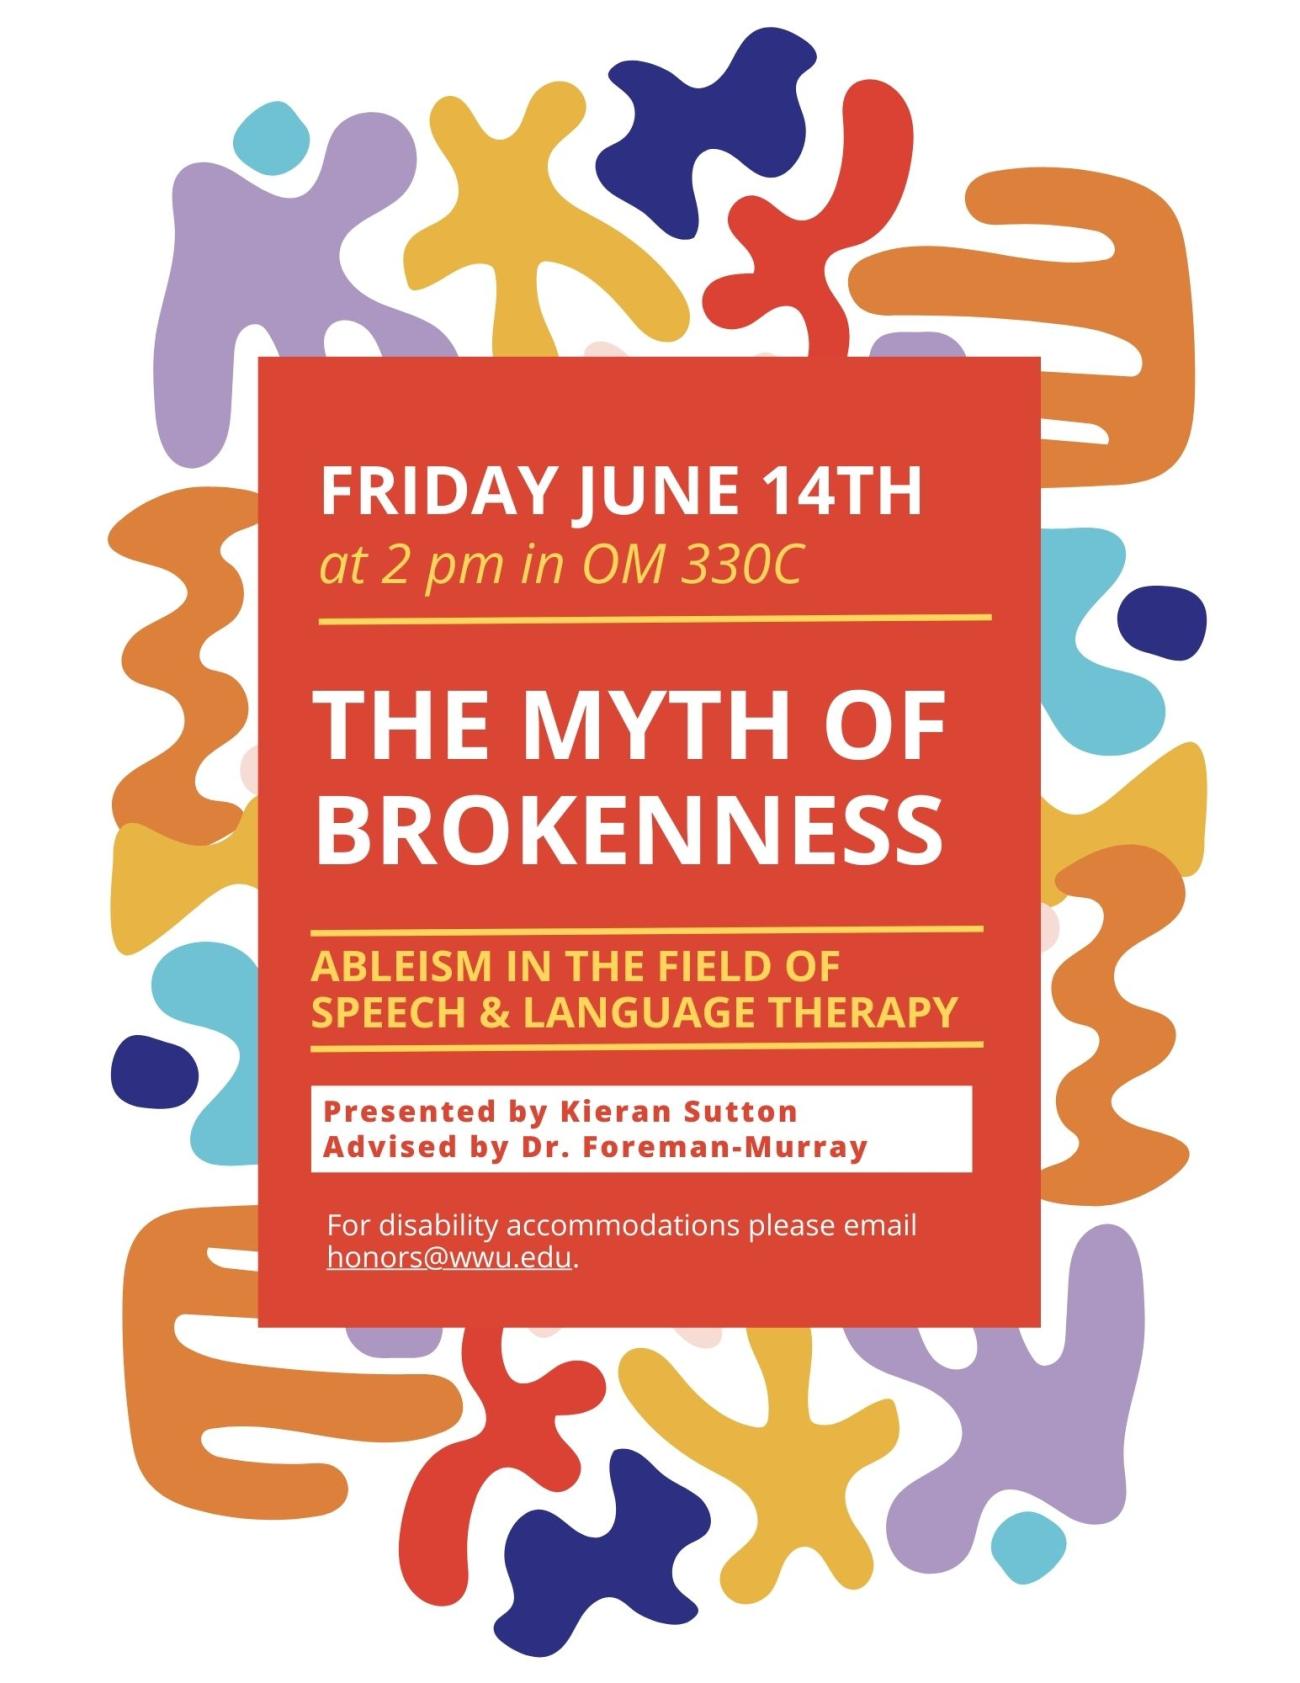 White background with blob-like shapes colored purple, blue, yellow, orange and red, with an orange rectangular text box placed over the background, stating: “Friday, June 14th, at 2pm in OM 330 C, The Myth of Brokenness, Ableism in the Field of Speech & Language Therapy, presented by Kieran Sutton, advised by Dr. Foreman-Murray, for disability accommodations please email honors@wwu.edu.” 